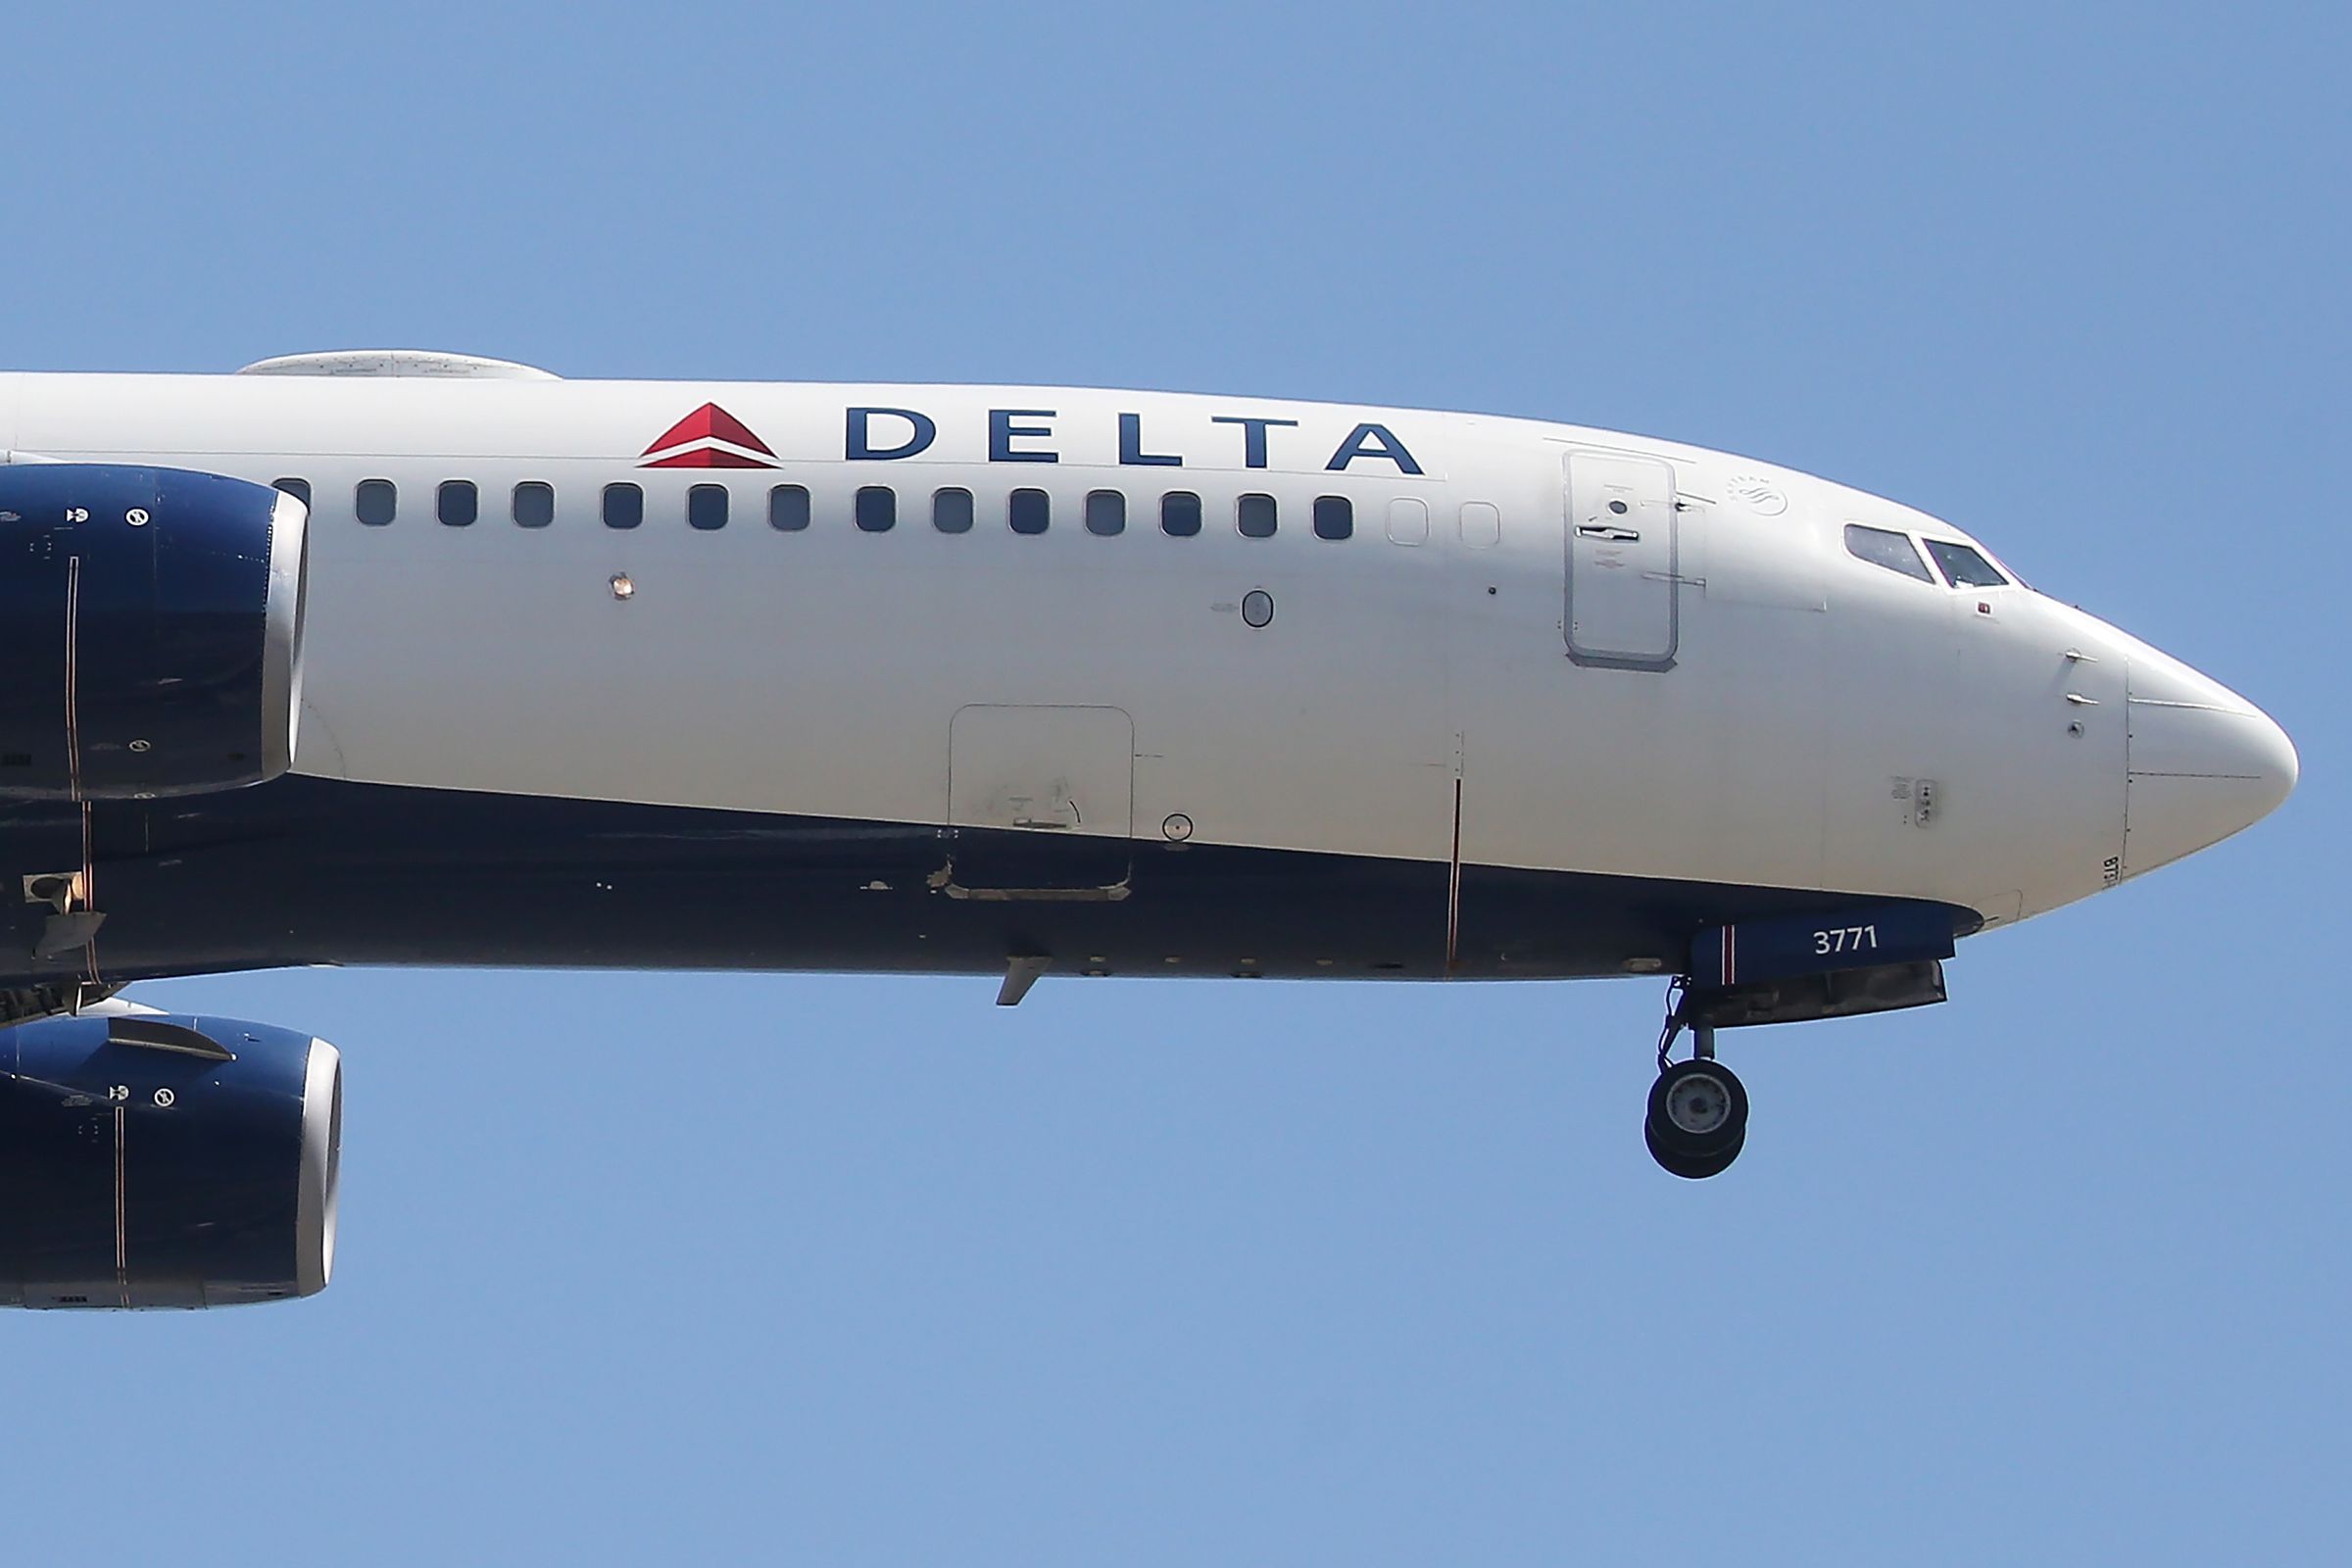 Delta Airlines To Cut Flights And Raise Fares As Fuel Costs Surge